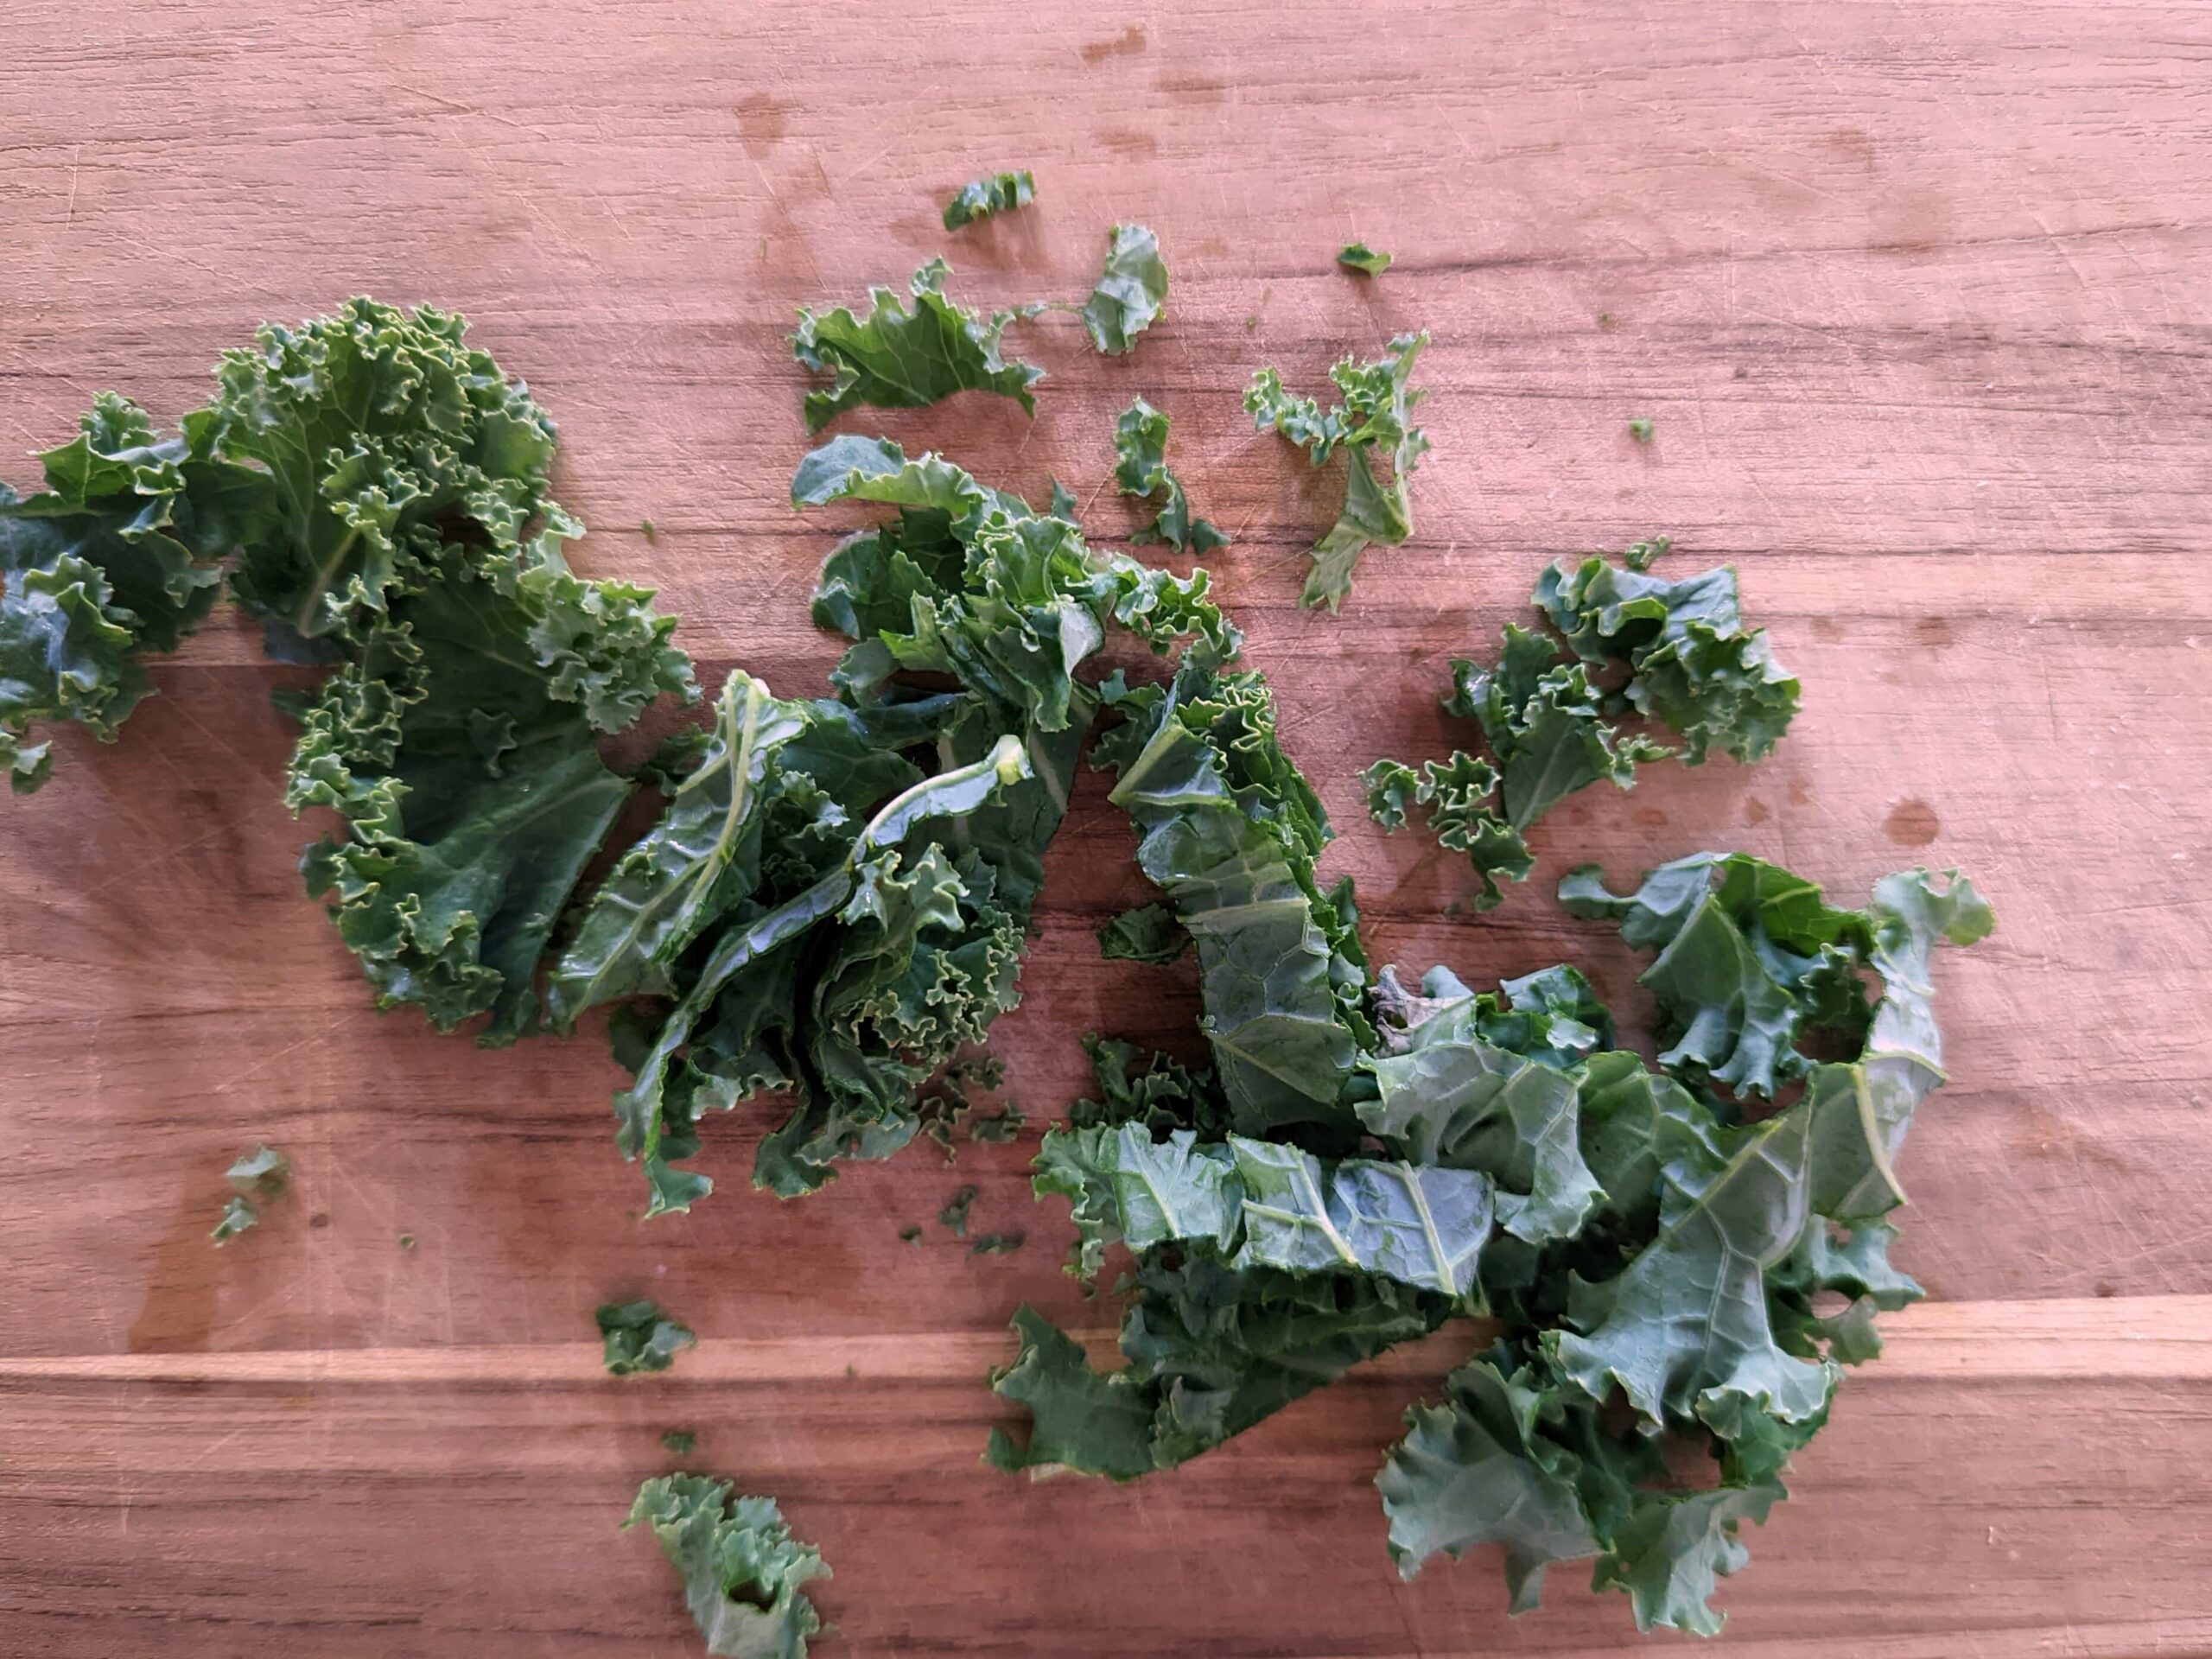 Kale being sliced into strips.